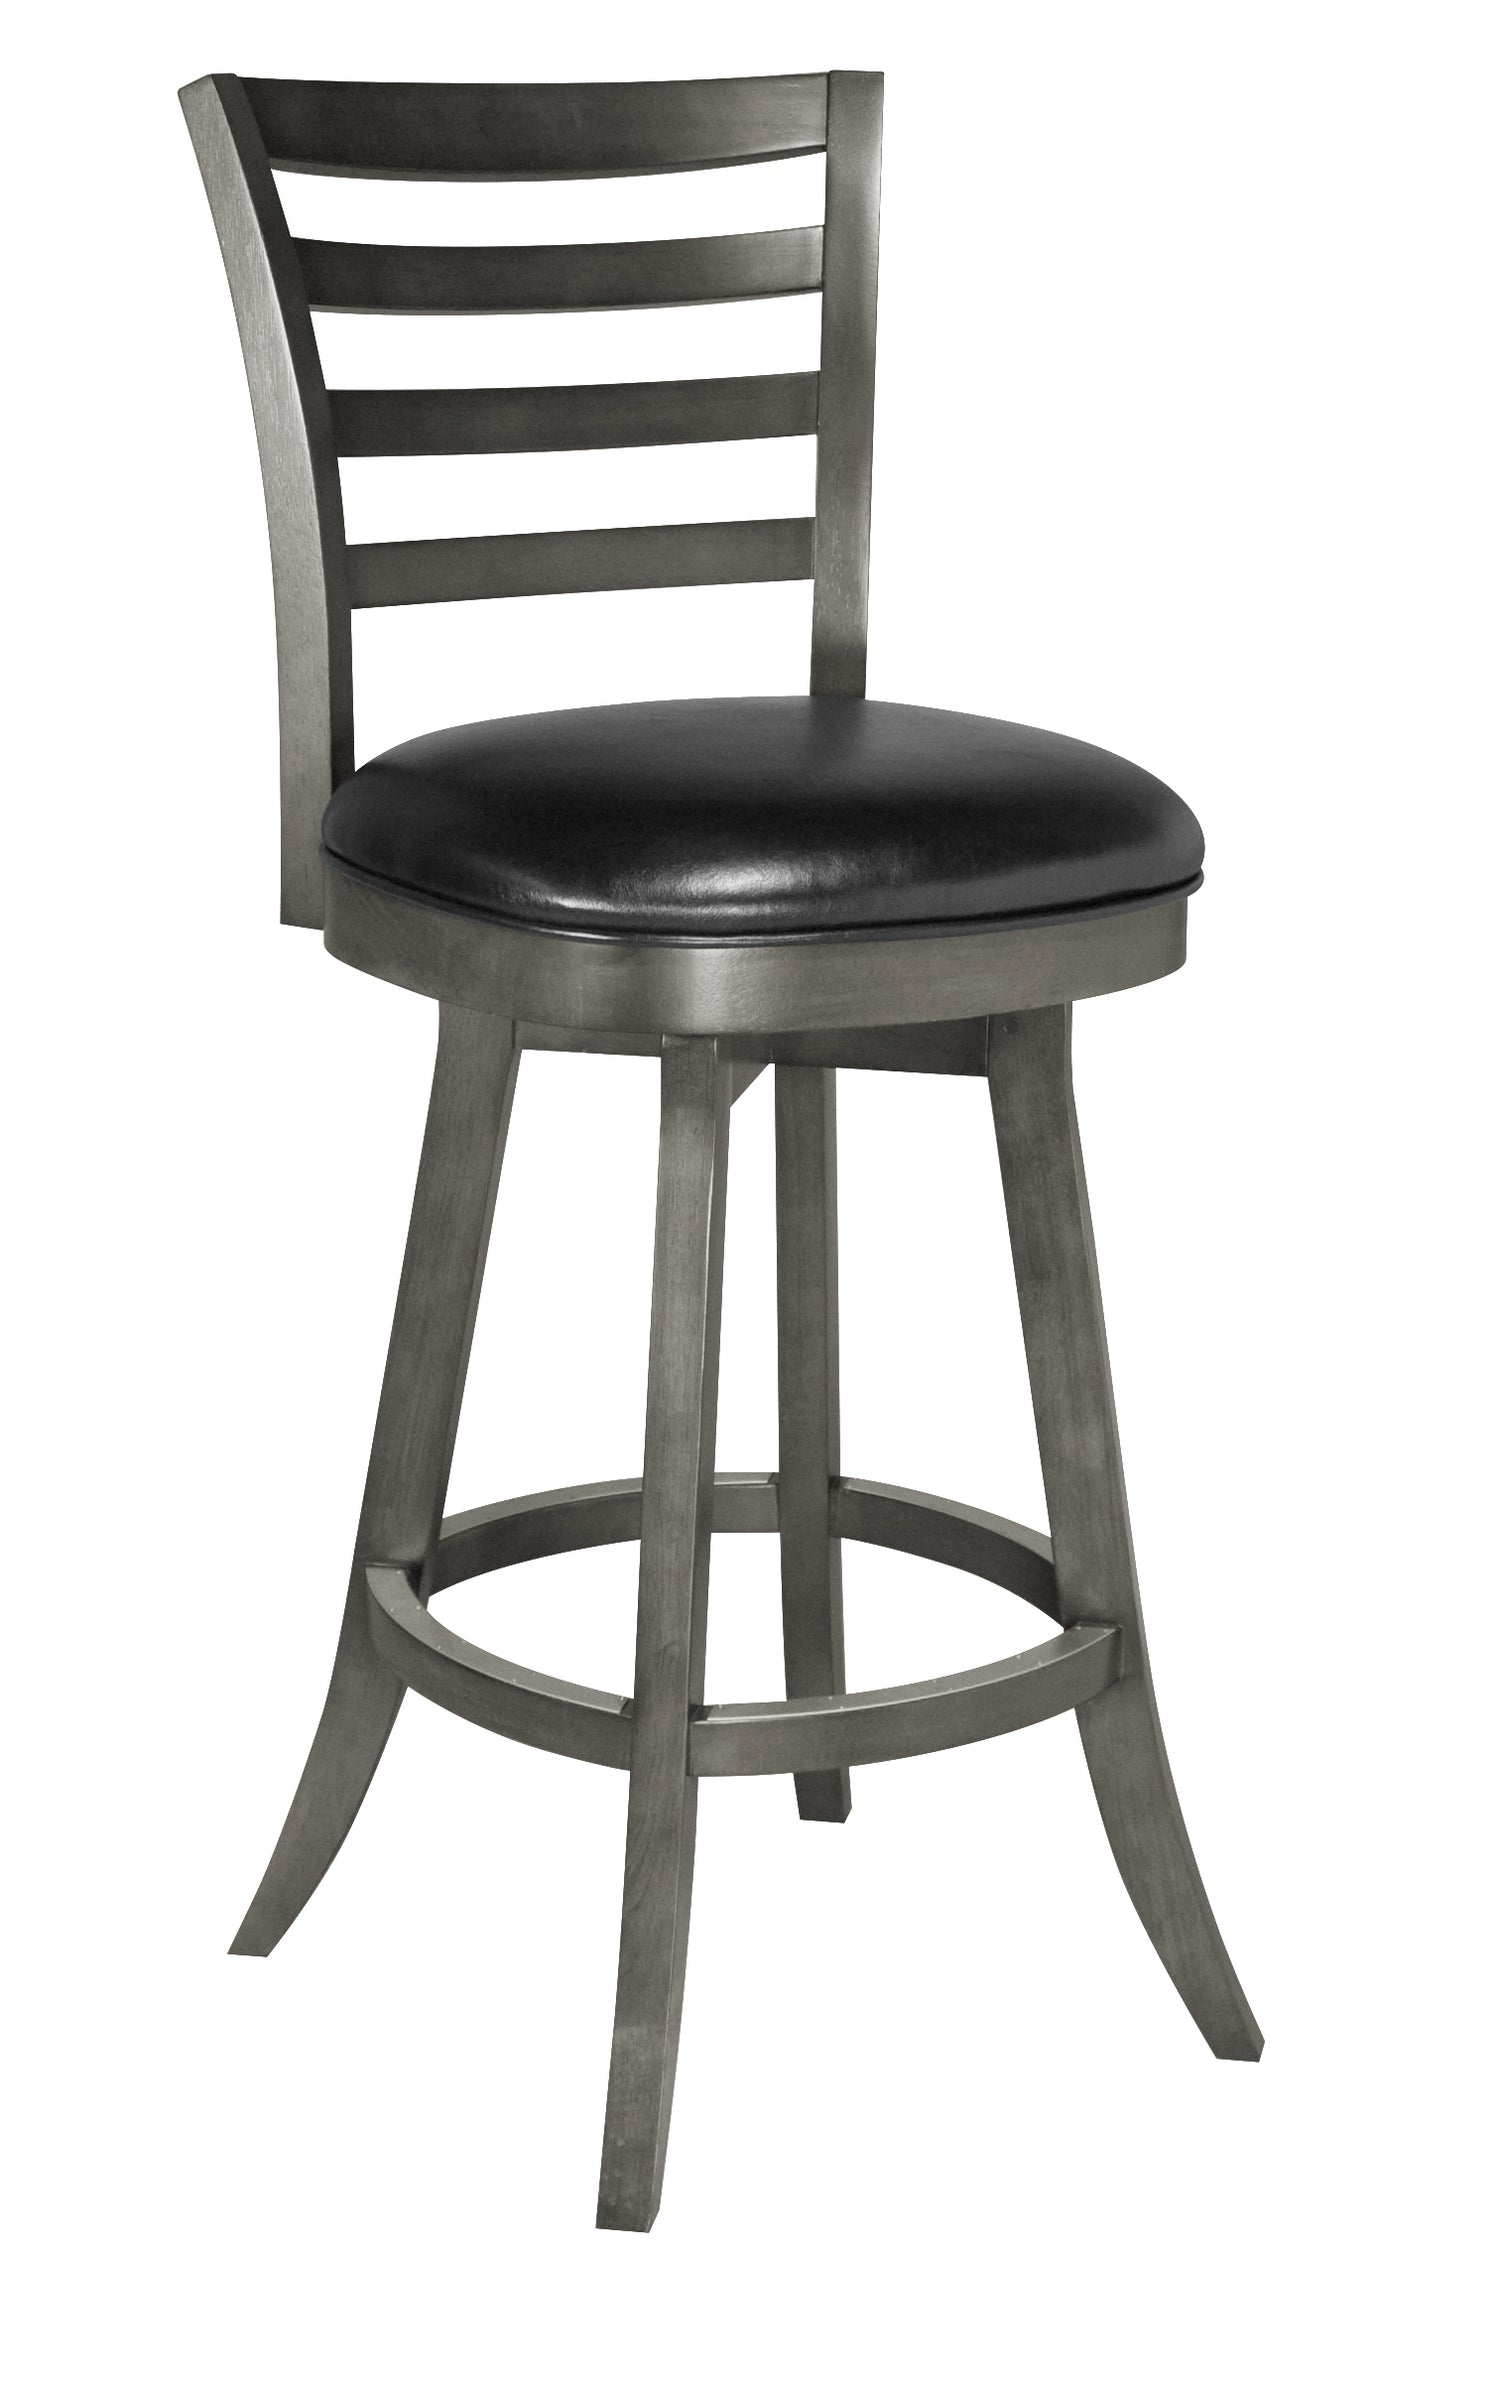 Legacy Billiards Sterling Backed Barstool in Shade Finish